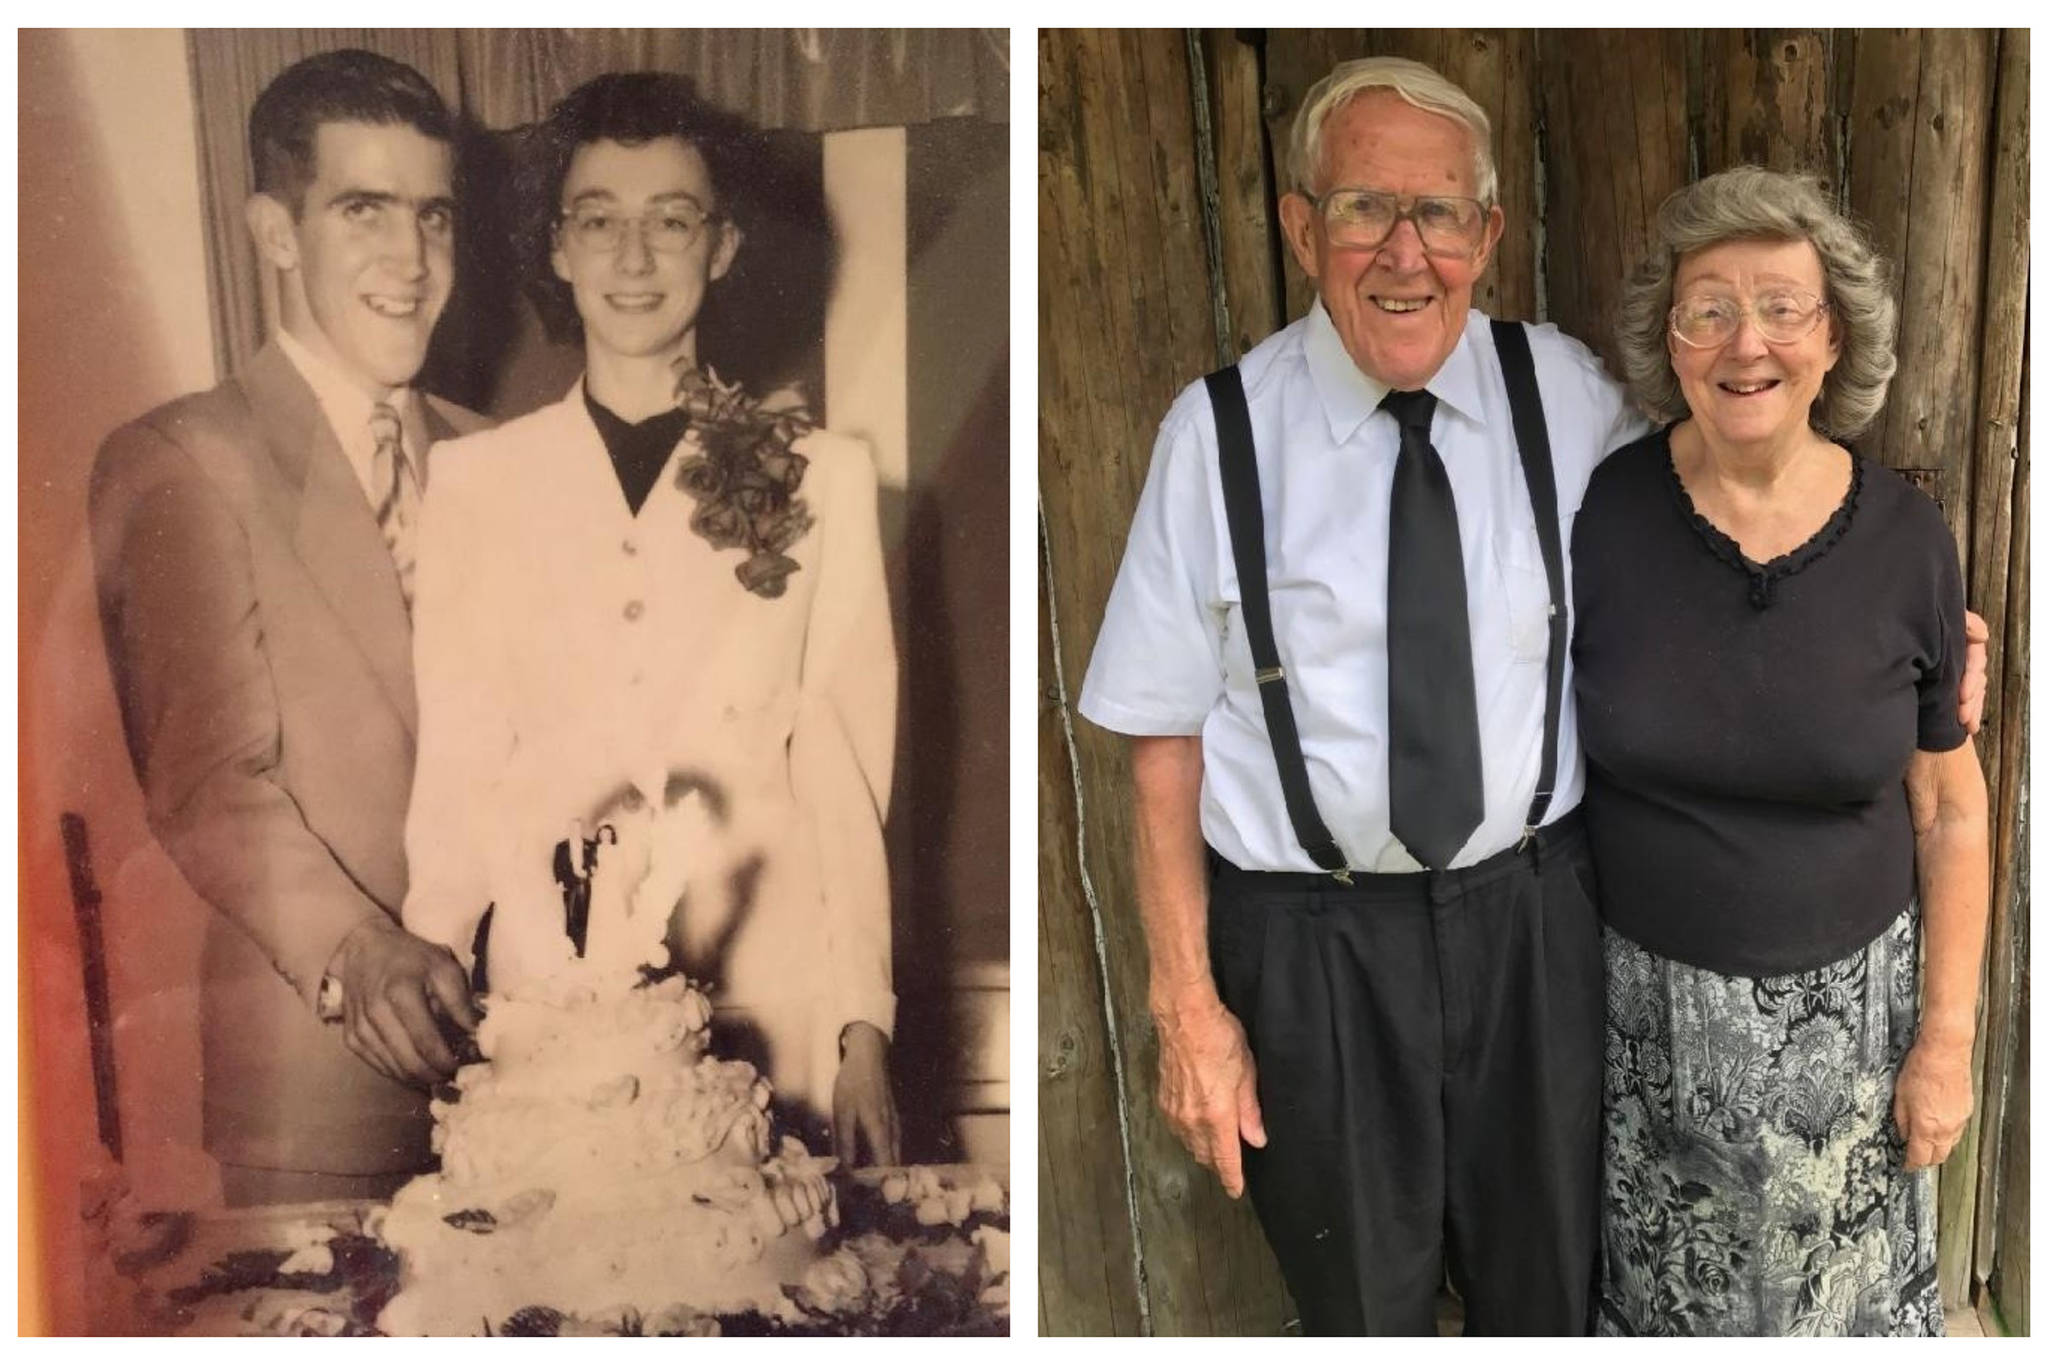 Donn and Virginia Doland will be celebrating their 70th wedding anniversary on June 9, 2021. (Courtesy Photos)